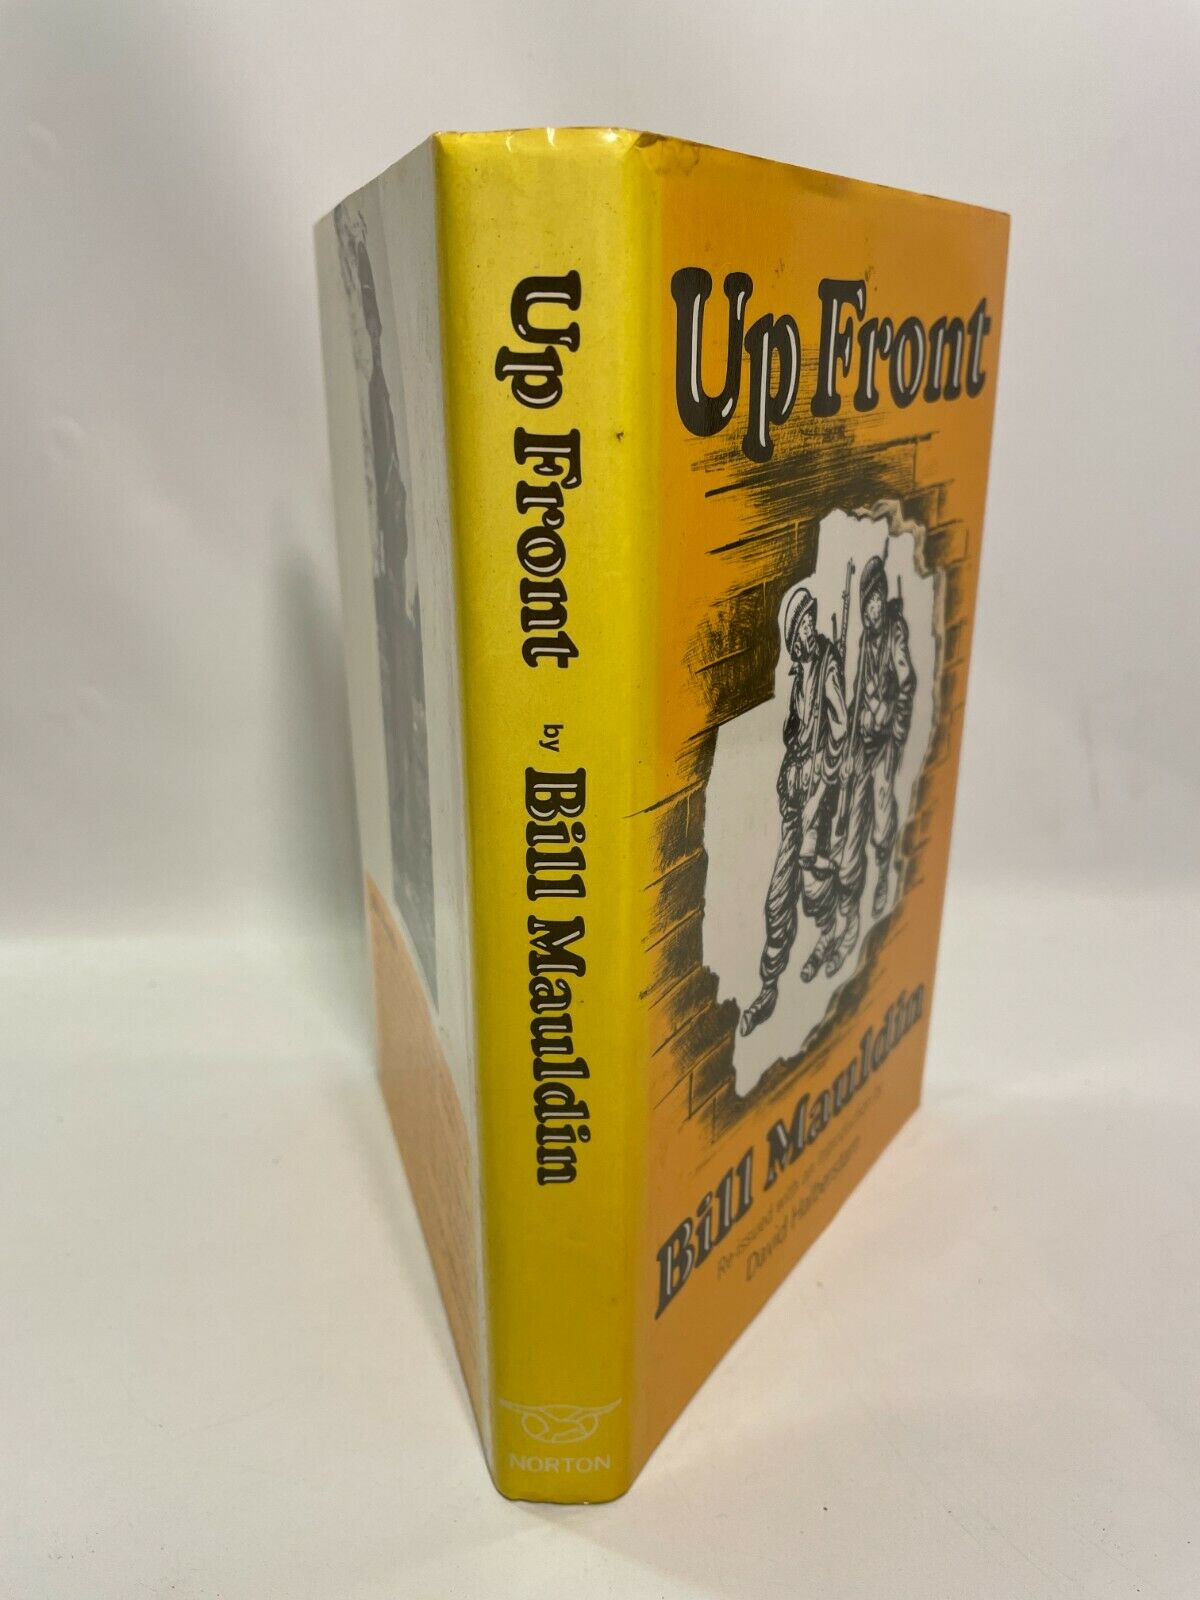 Up Front  by Bill Mauldin 1968 Re-Issued with an Intro by David Halberstam